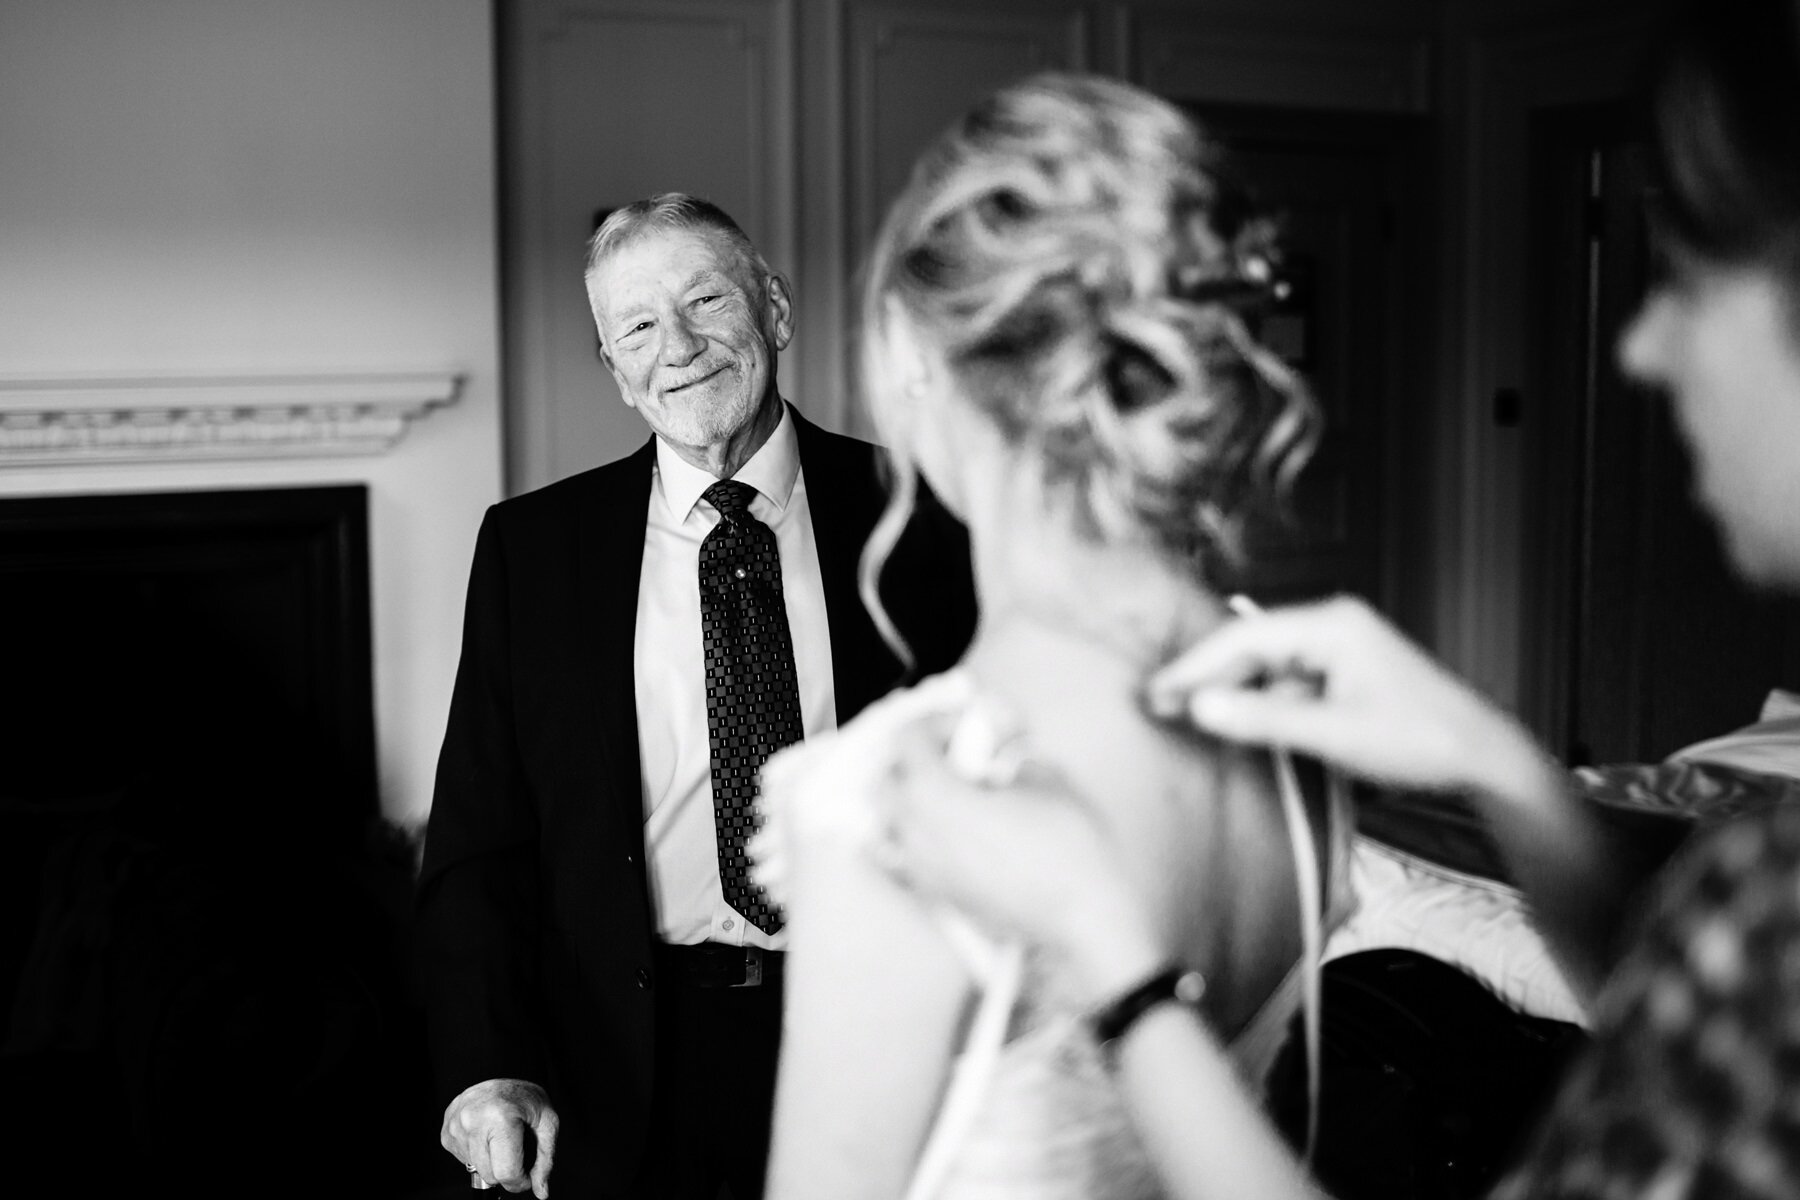 Father of the bride looking proudly at his daughter on her wedding day at Horsley Towers.